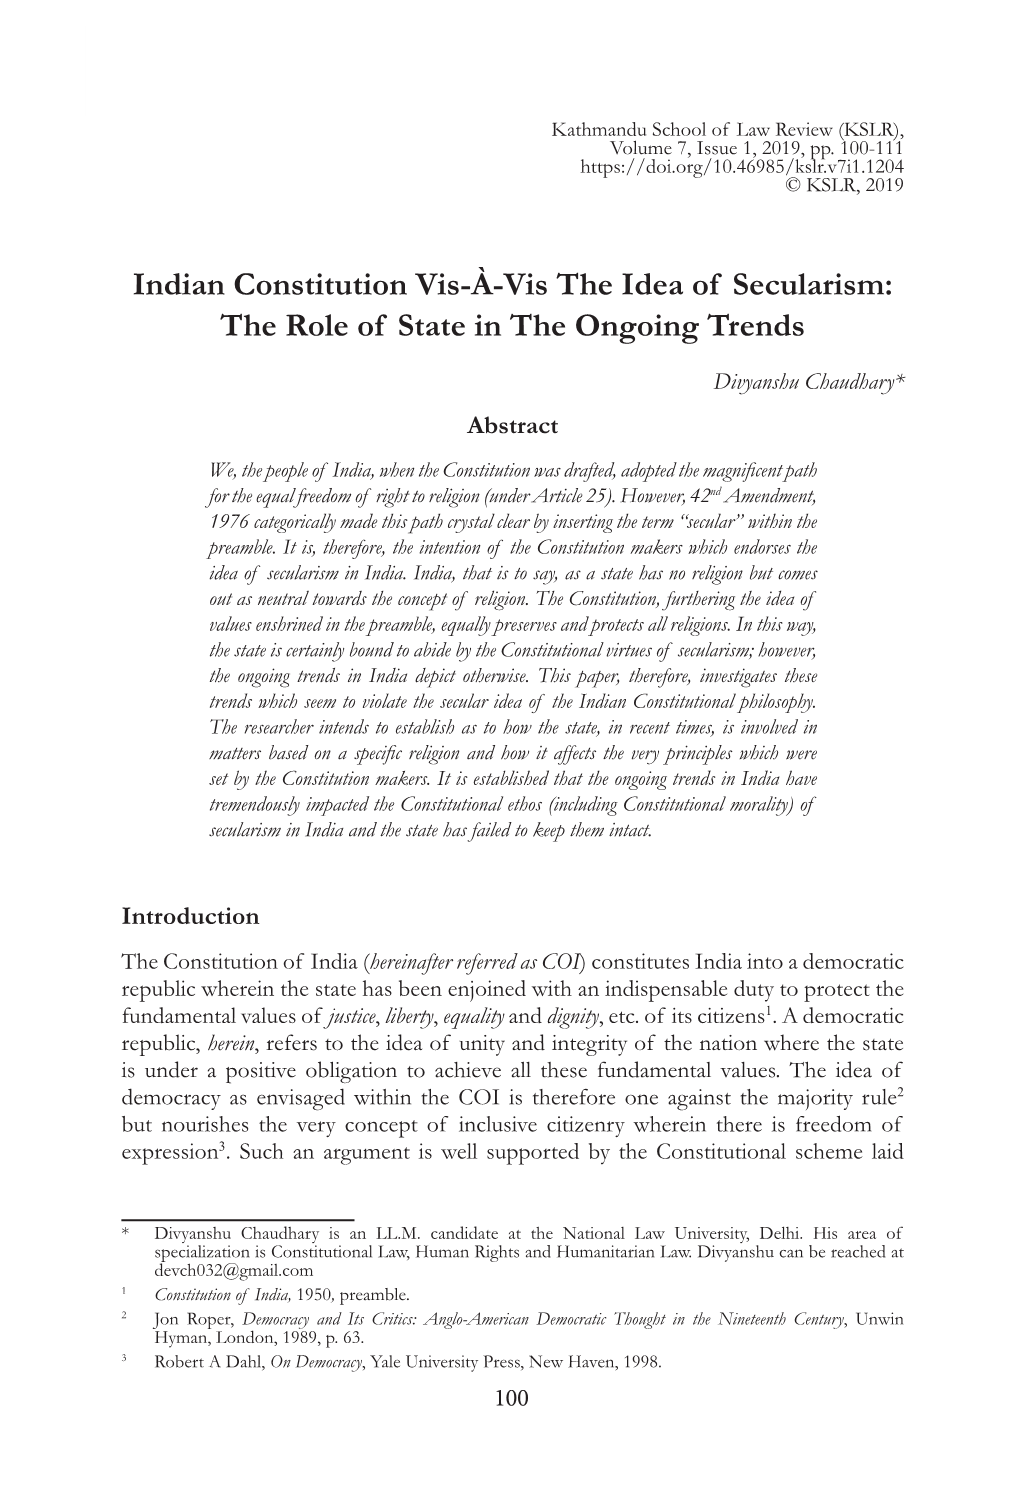 Indian Constitution Vis-À-Vis the Idea of Secularism: the Role of State in the Ongoing Trends